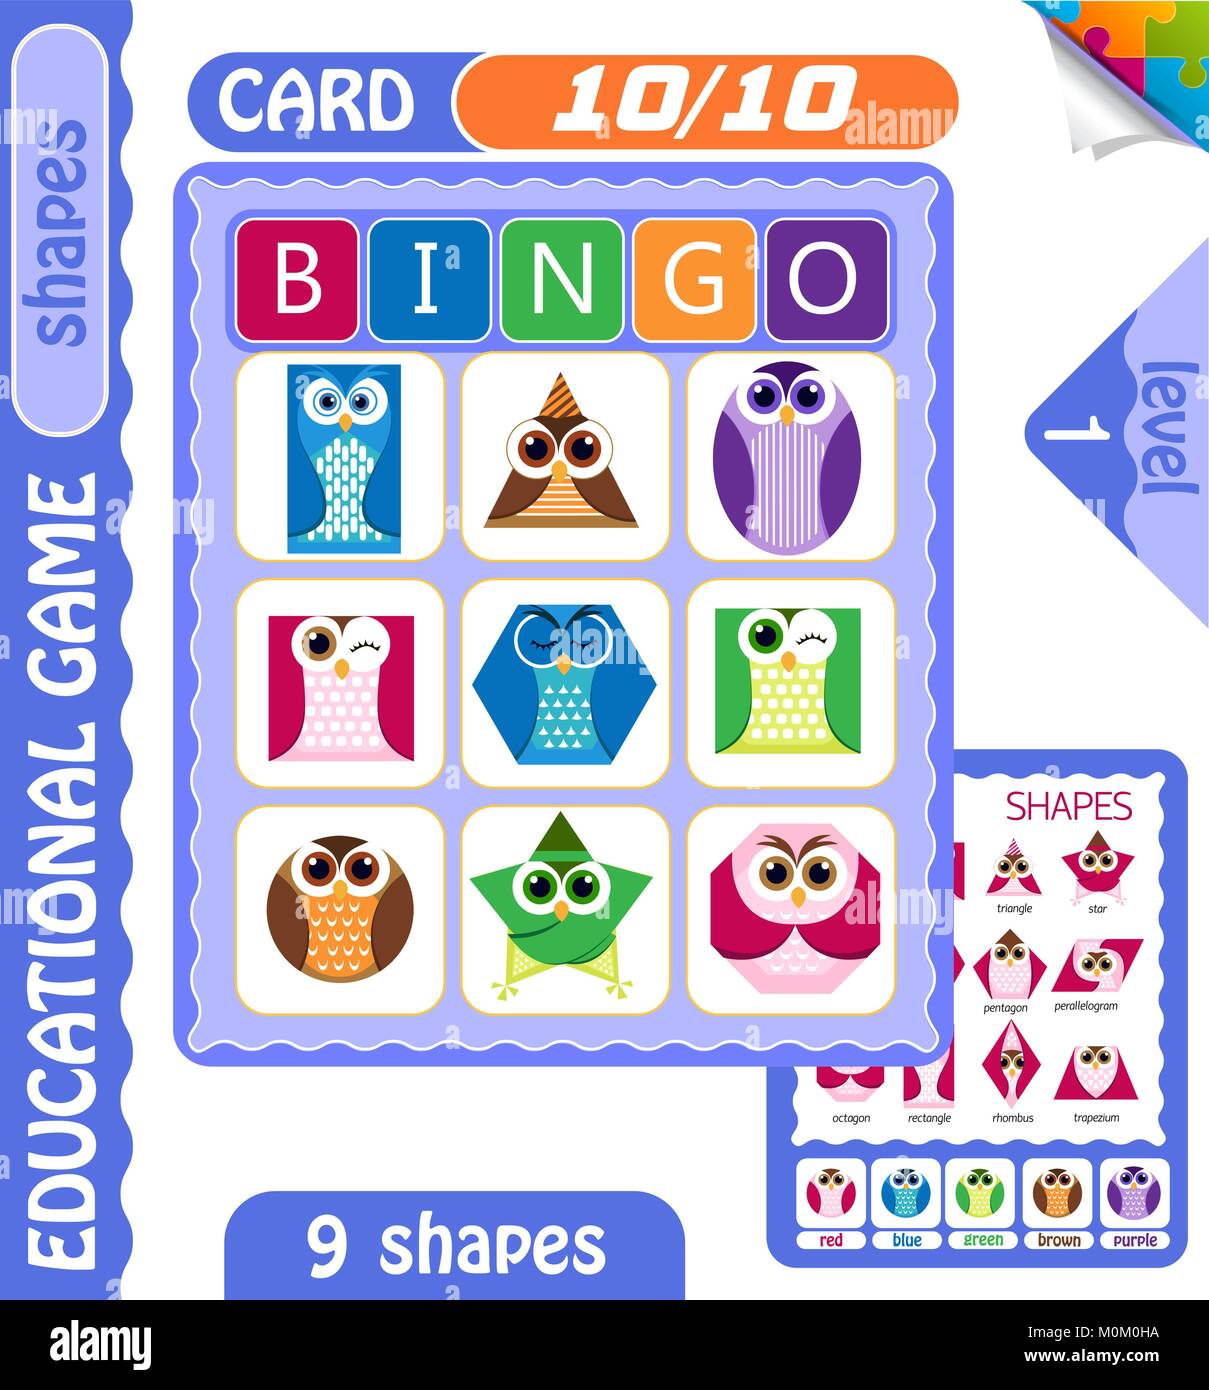 educational-bingo-game-for-preschool-kids-with-shapes-in-the-form-of